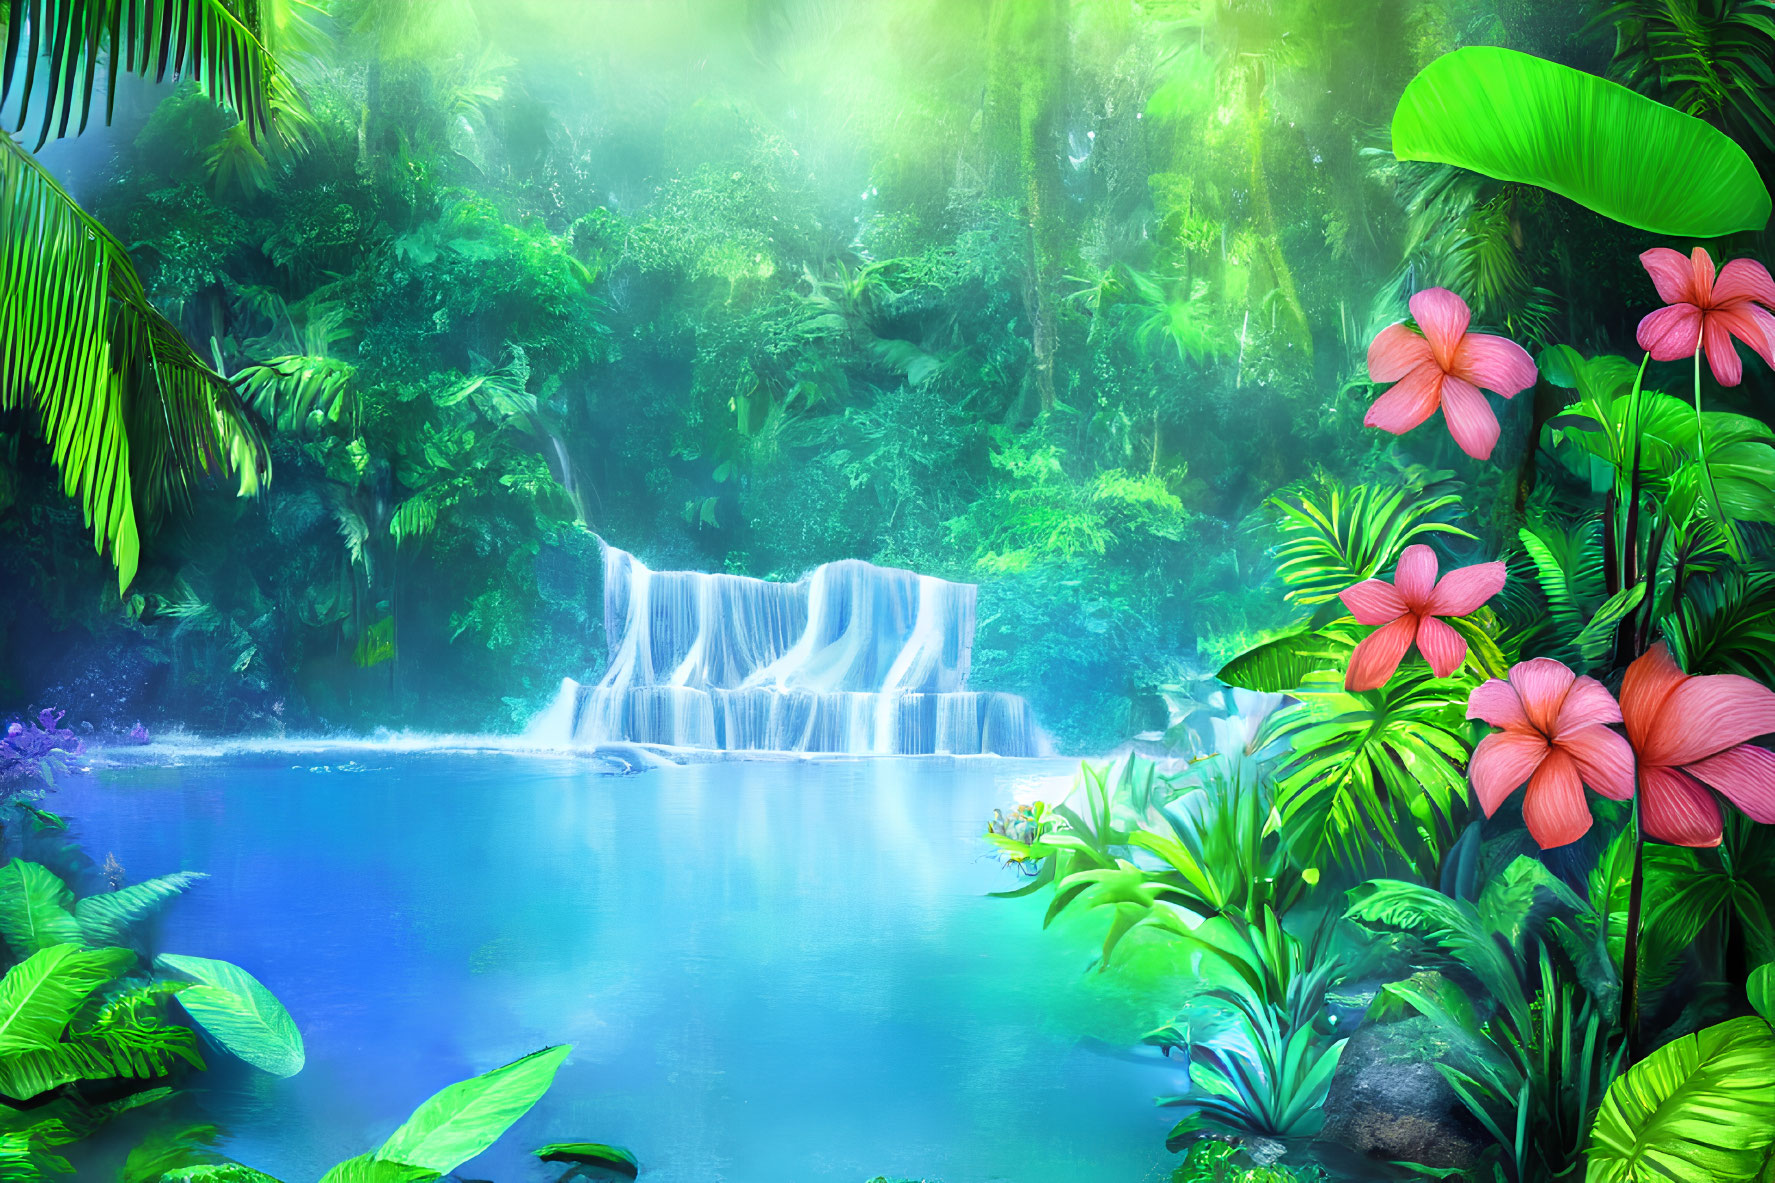 Tropical waterfall with green foliage and pink flowers